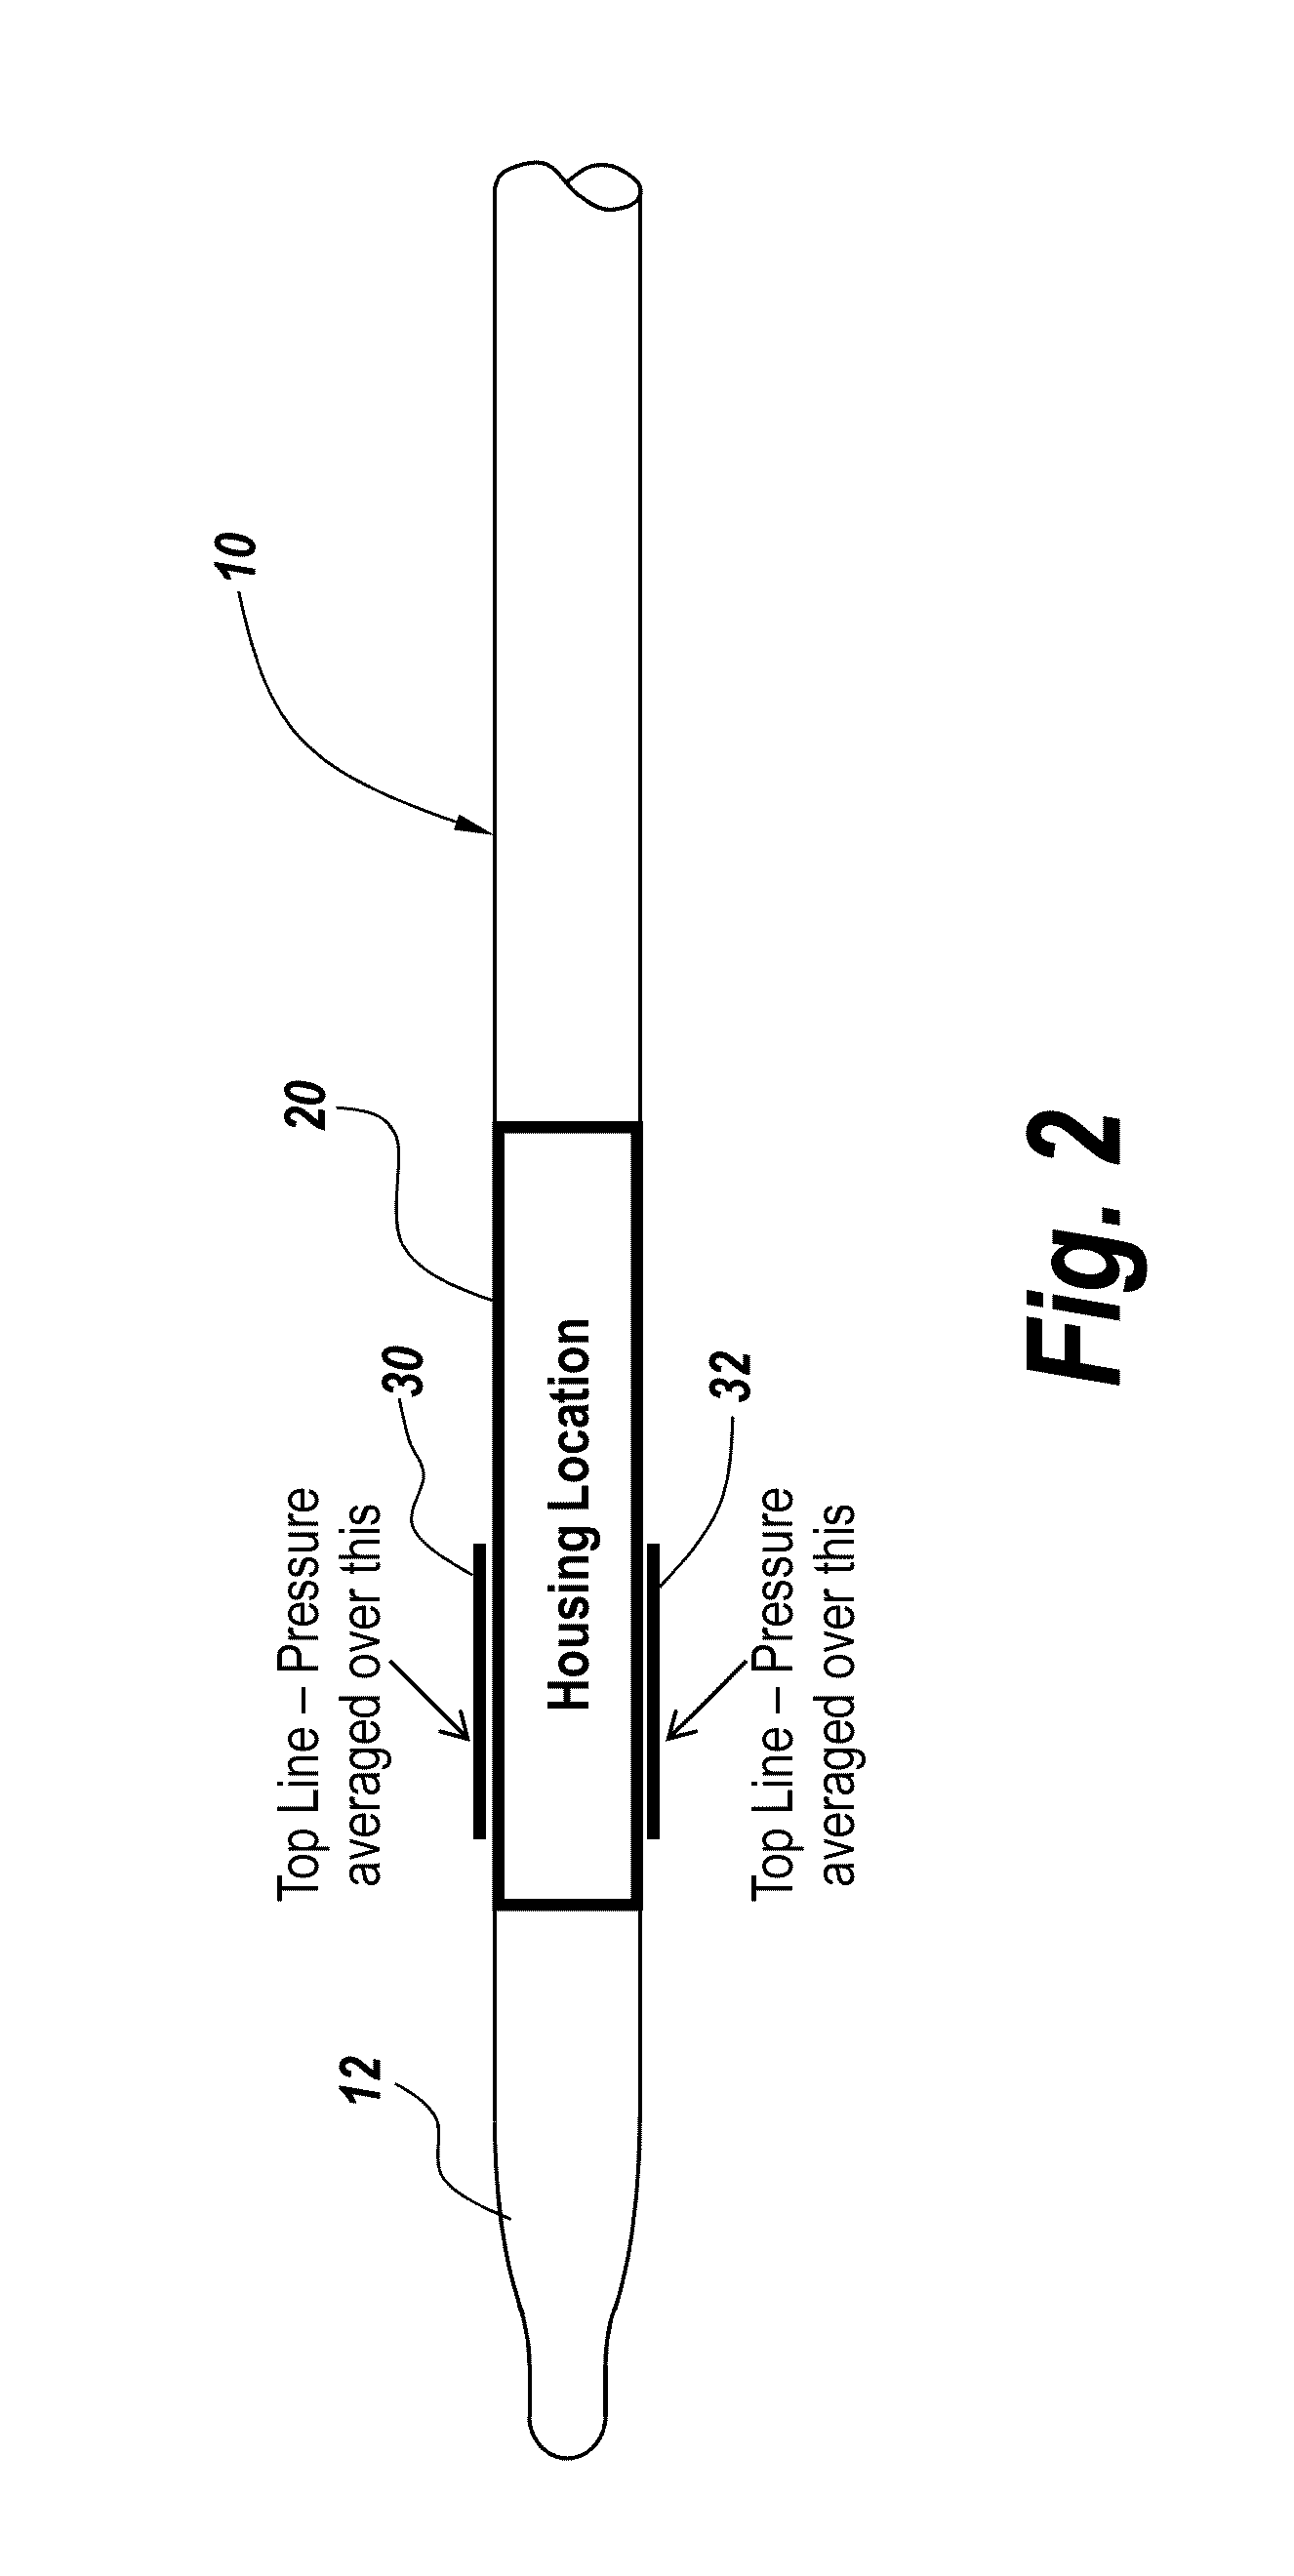 Method and System of Measurement of Mach and Dynamic Pressure Using Internal Sensors